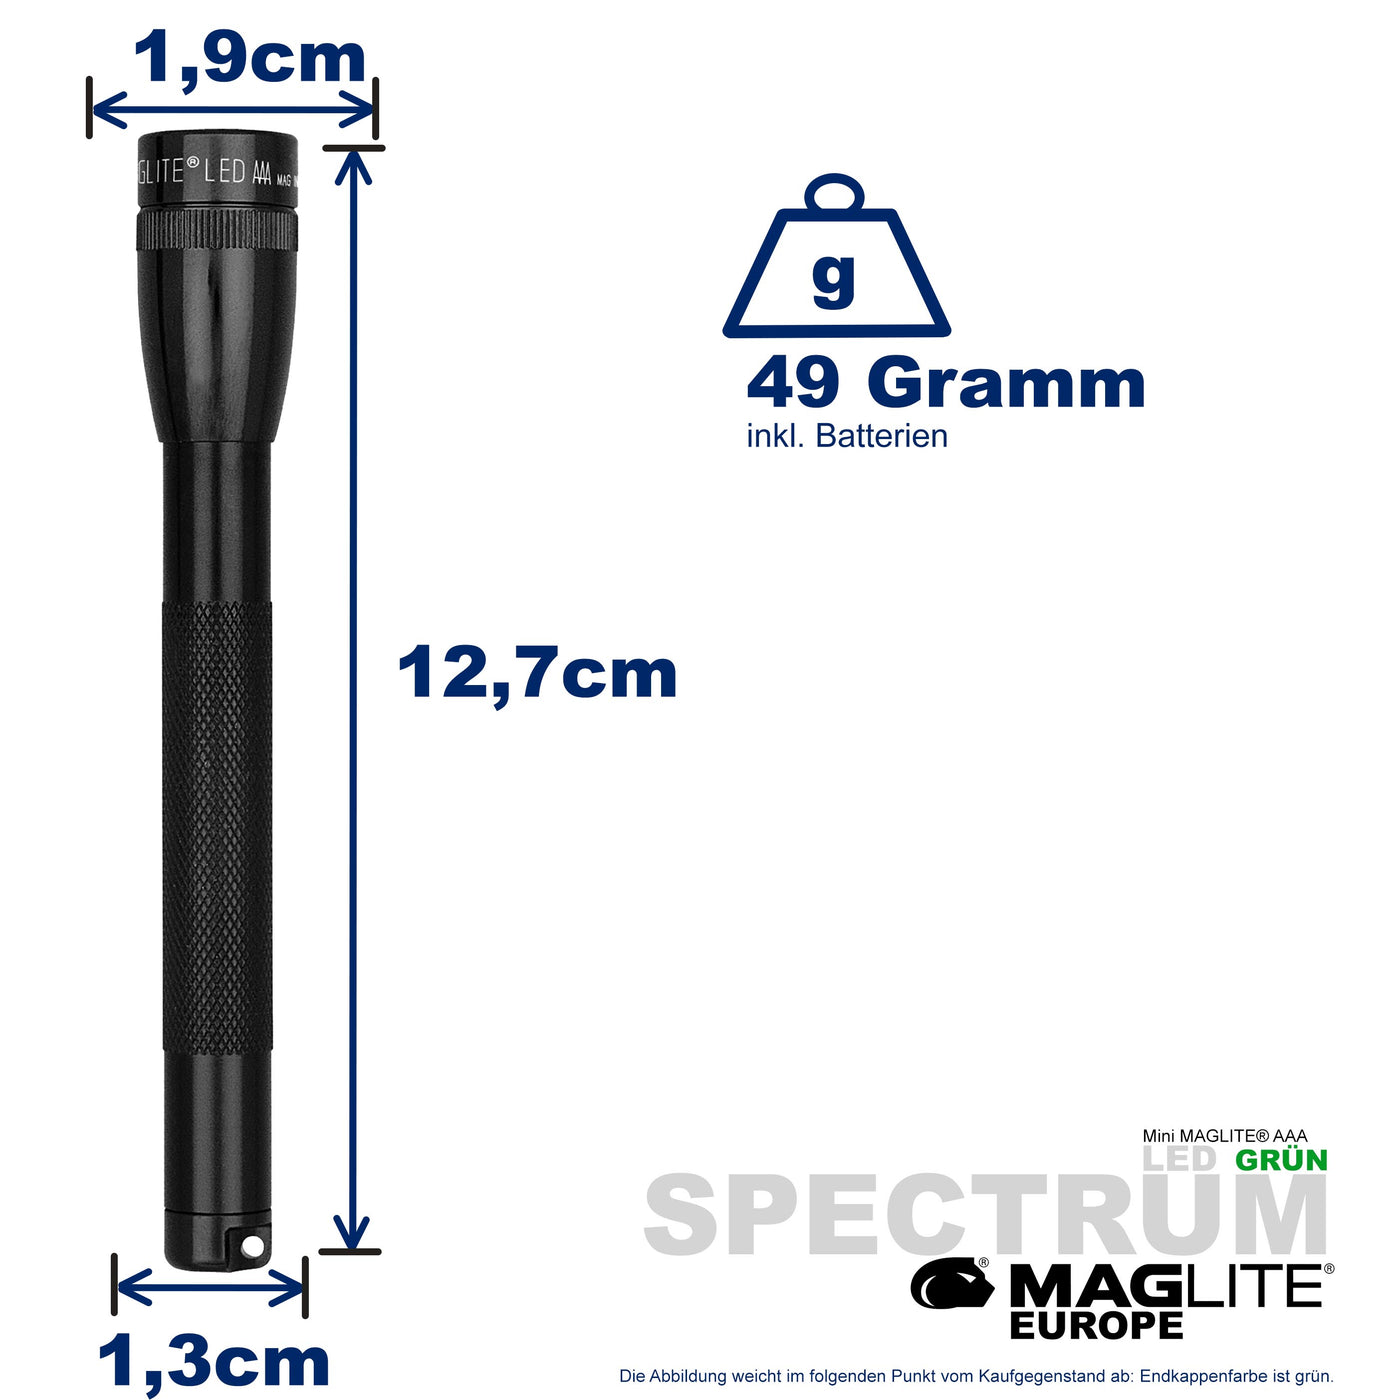 Maglite® Spectrum Series™ with green LED